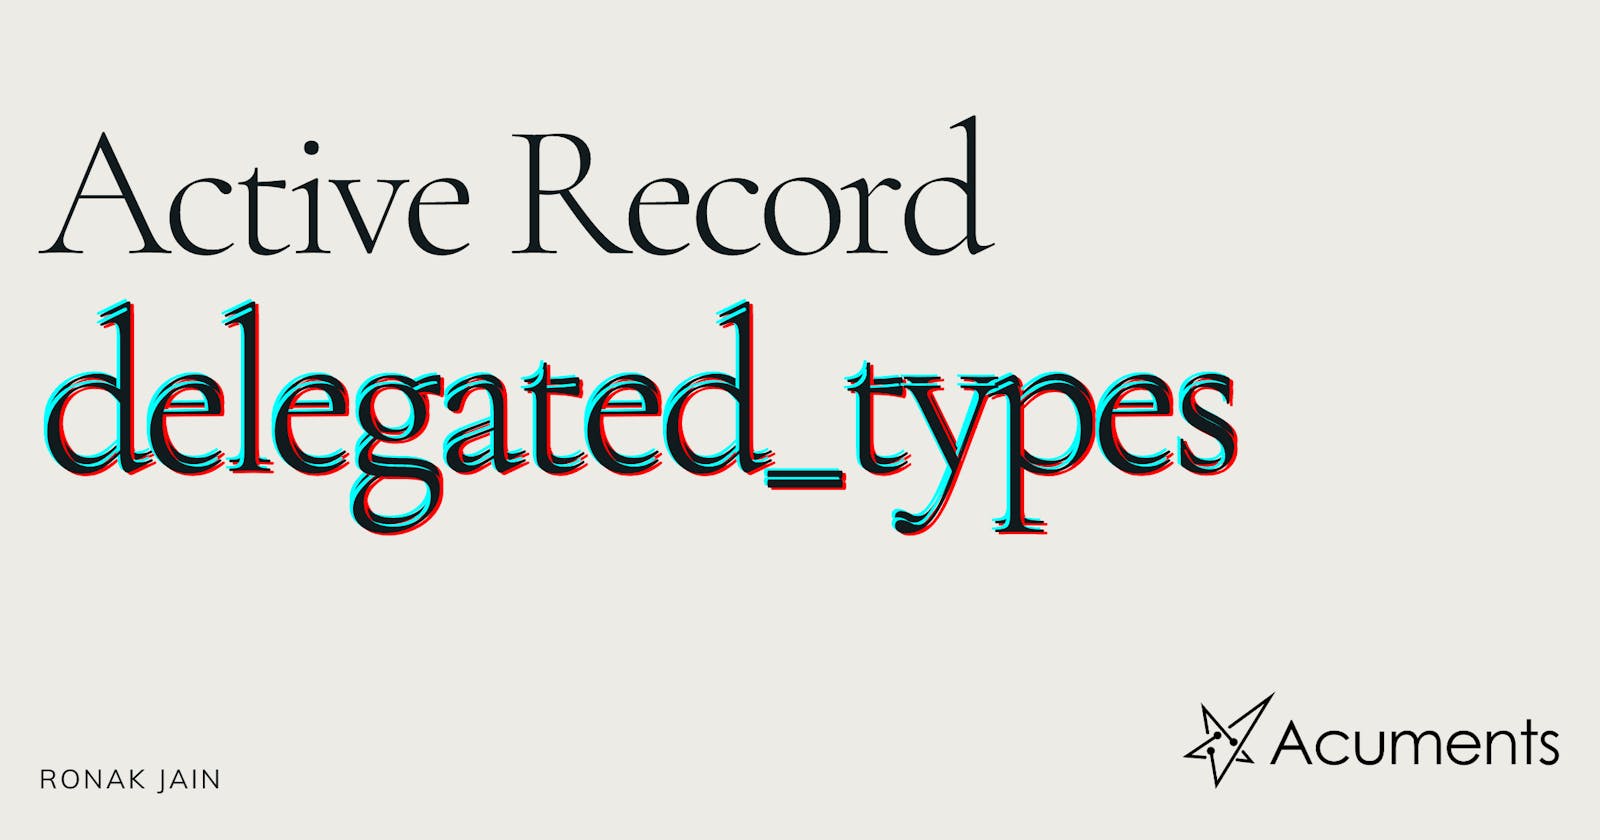 Active Record delegated_type